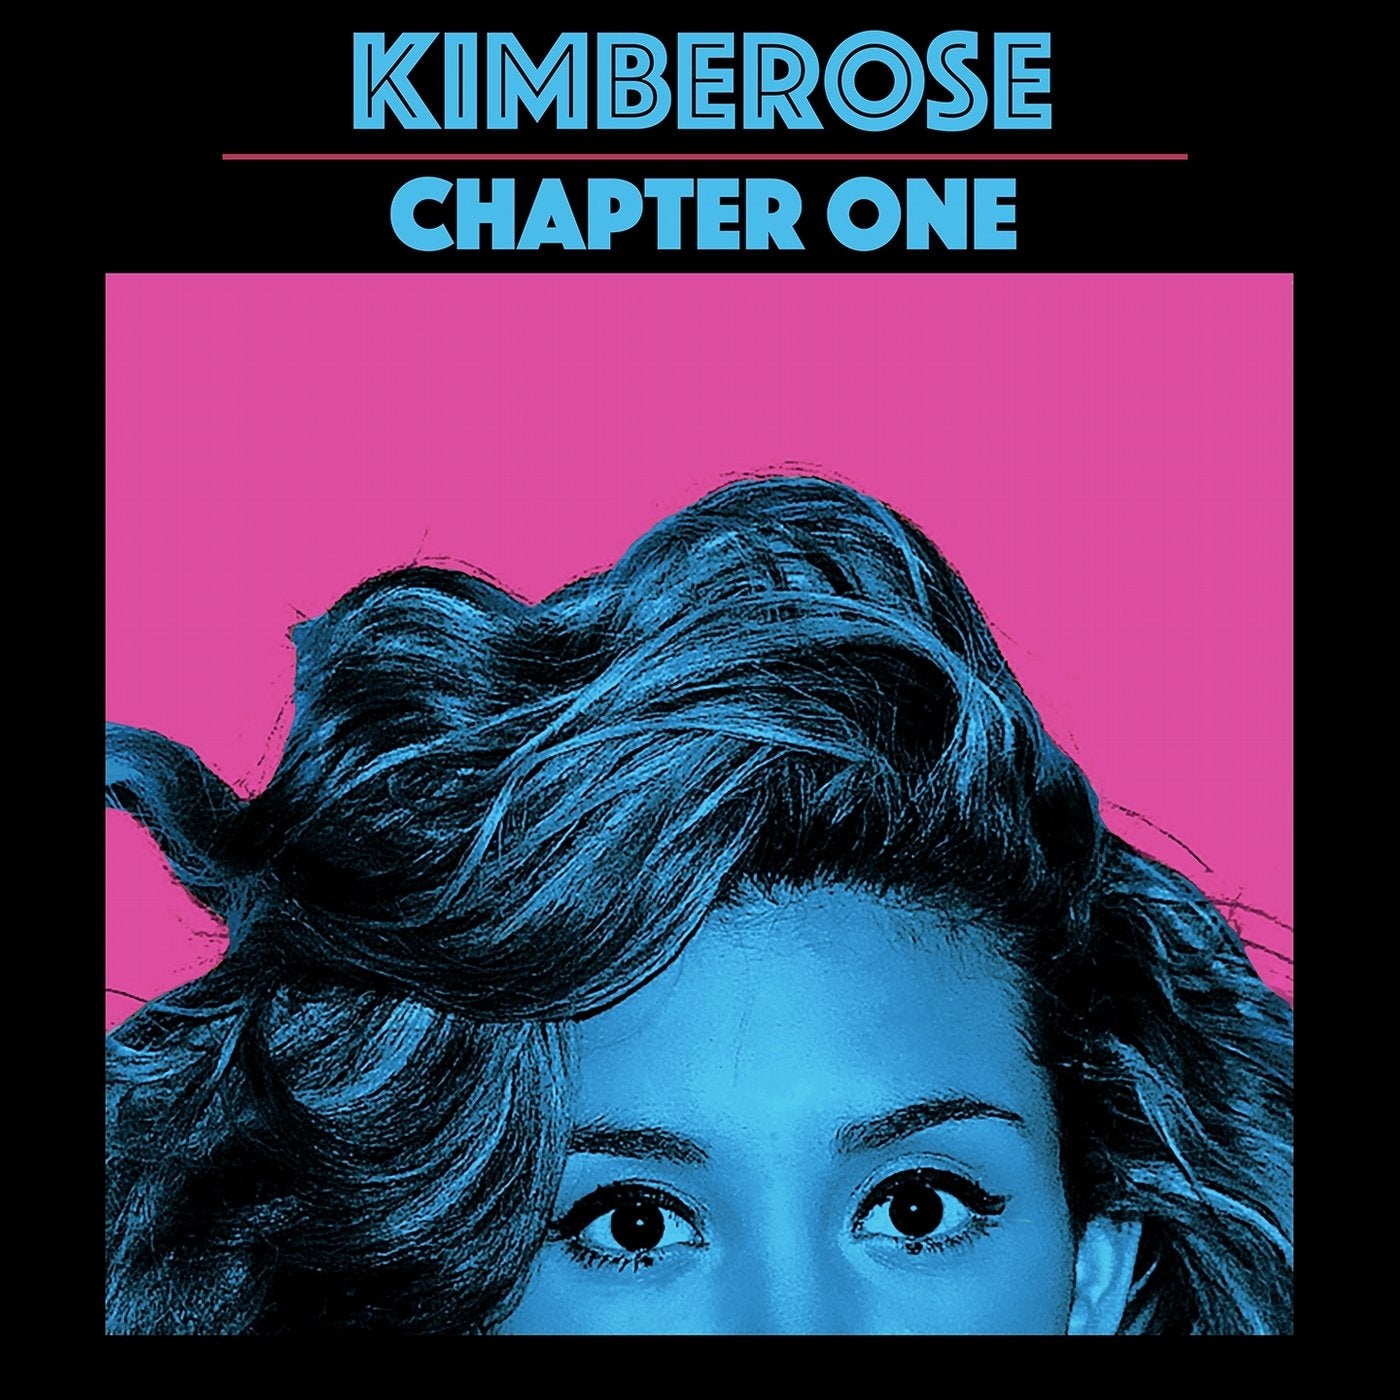 Chapter One (Deluxe Edition)